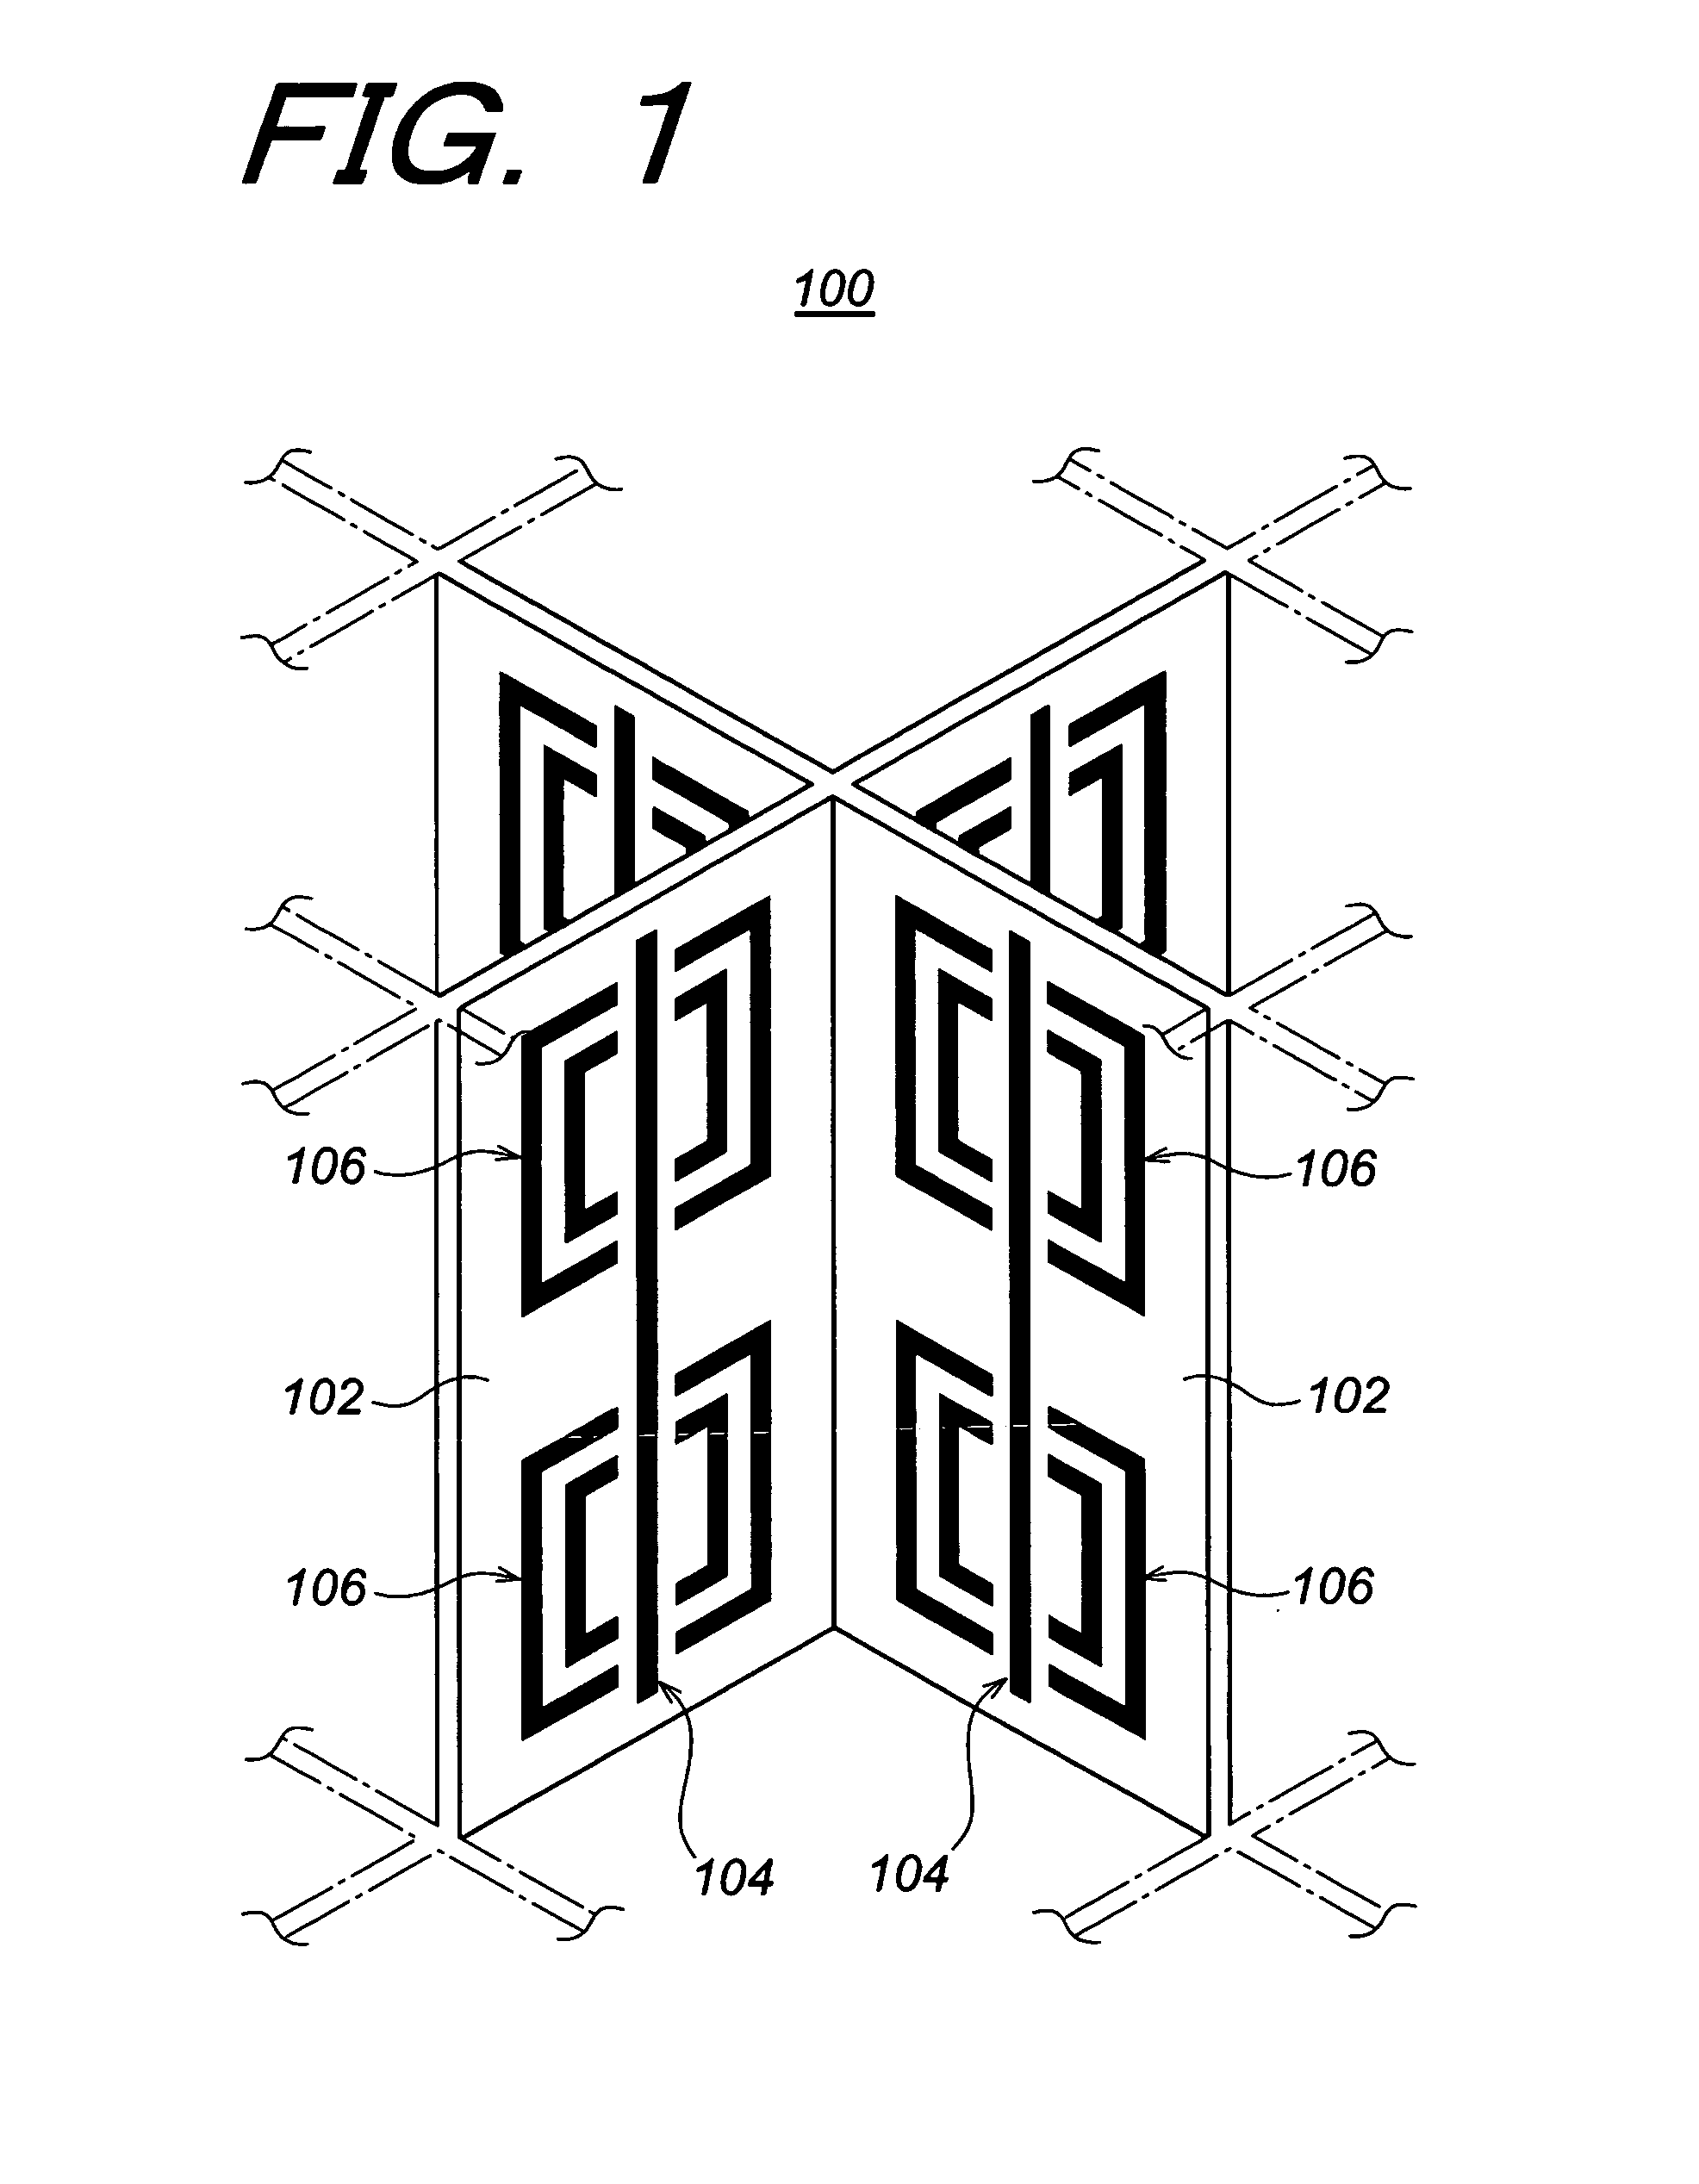 Optical material, optical device fabricated therefrom, and method for fabricating the same